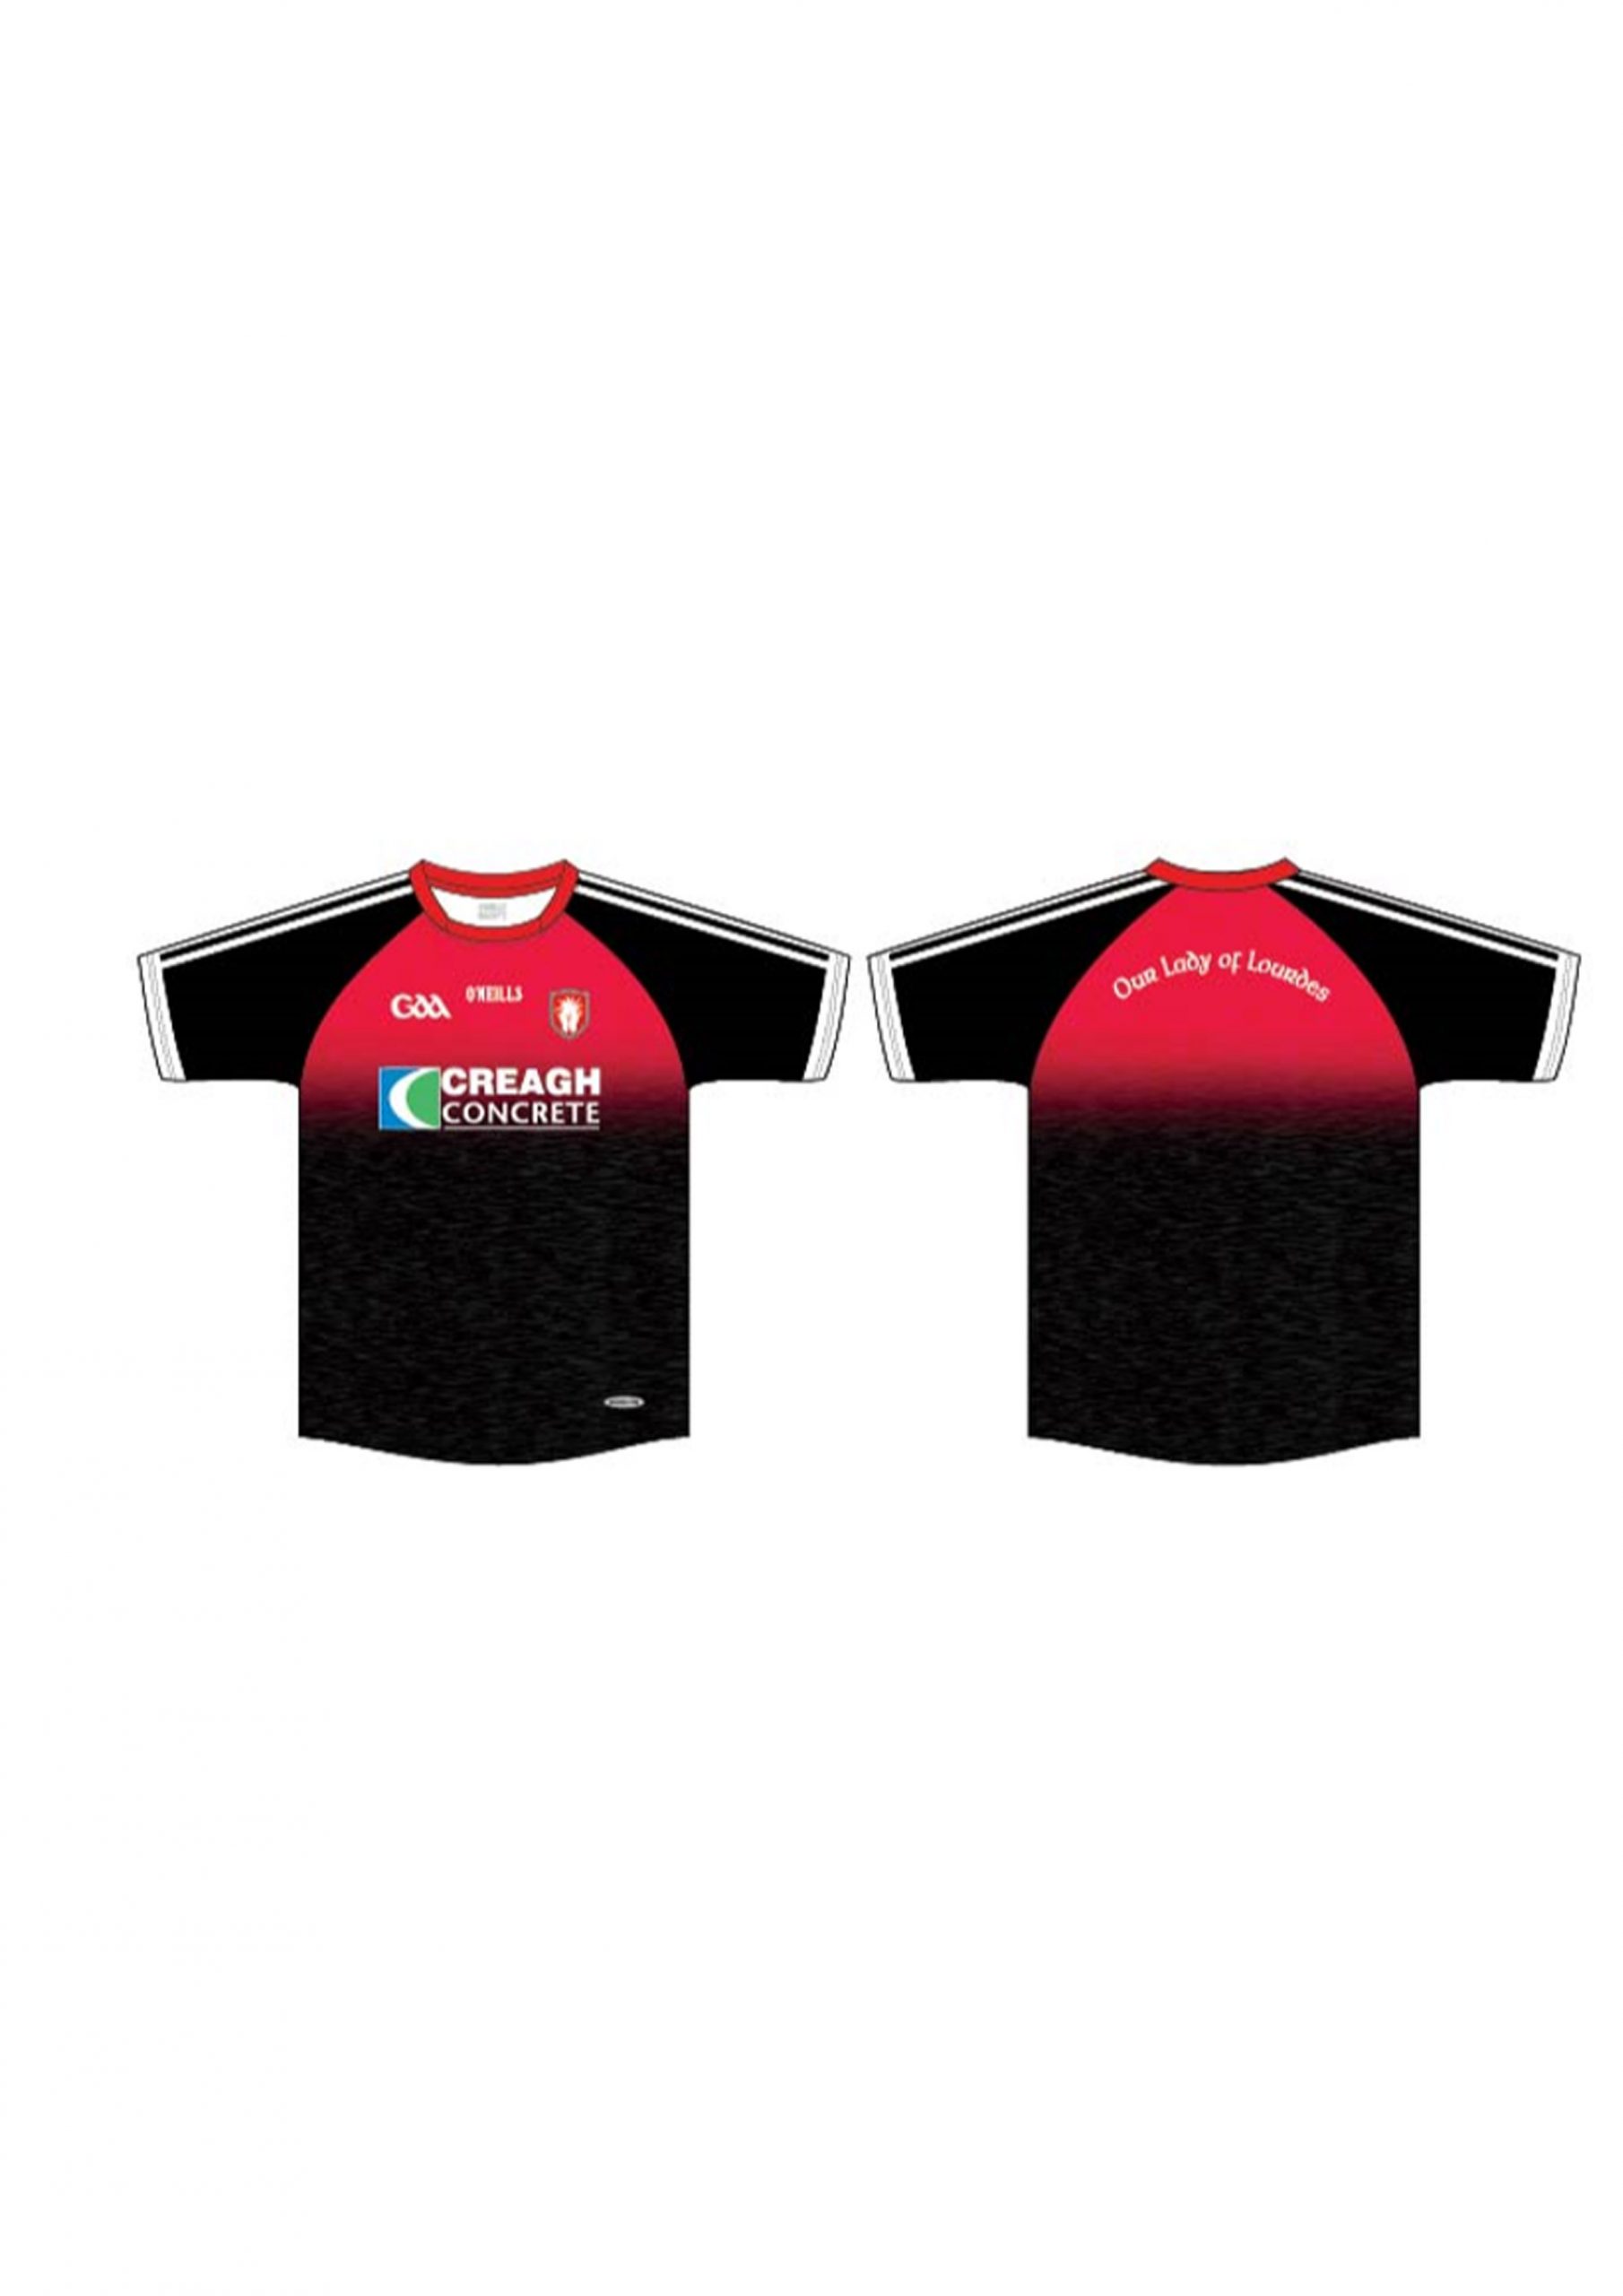 Our Lady of Lourdes – P.E Jersey - Team Kit